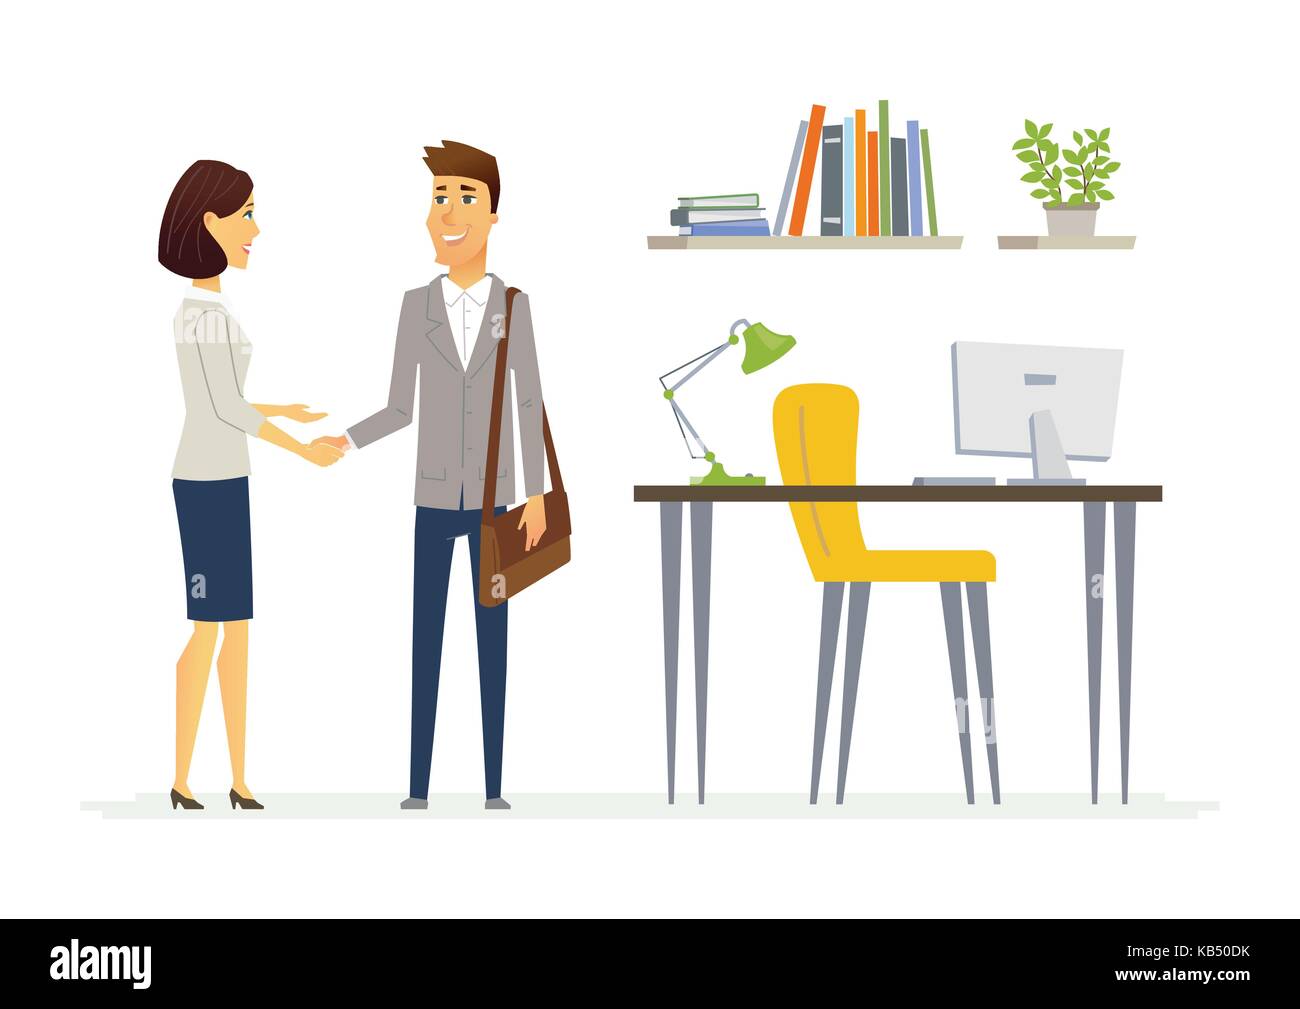 Productive business communication - modern cartoon people characters illustration with two employees smiling and shaking hands. An example of good rel Stock Vector